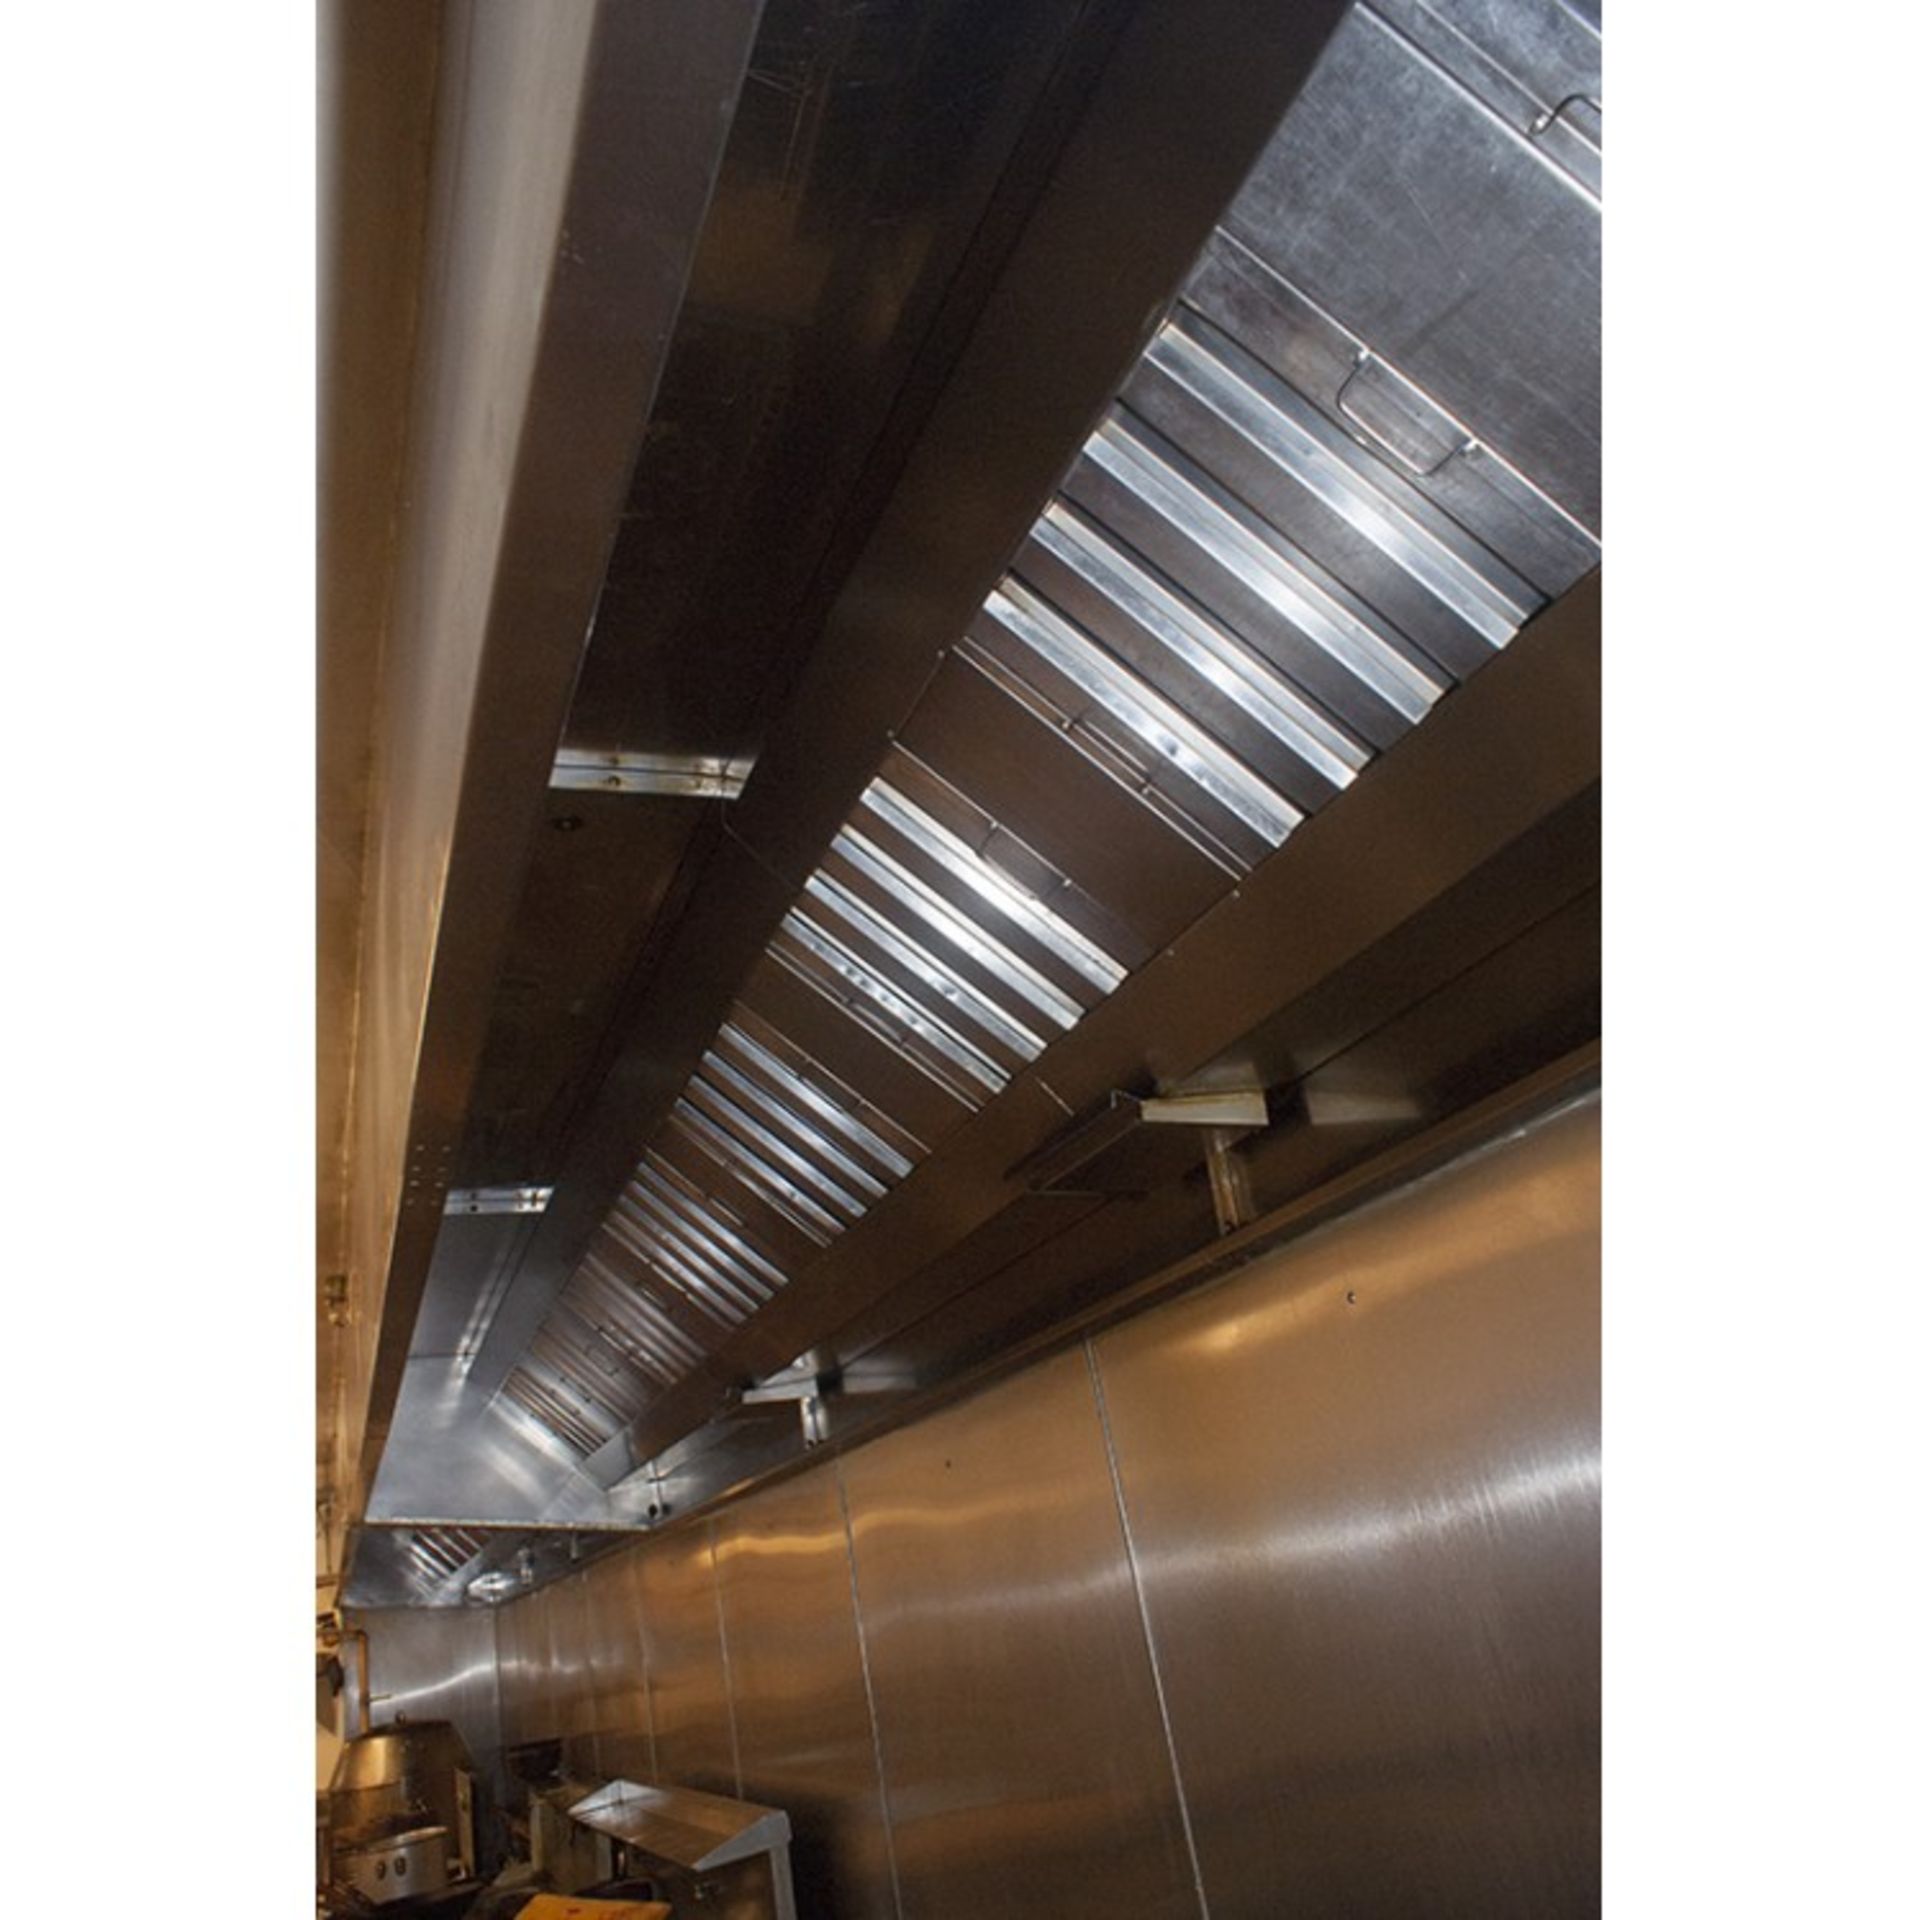 1 x 24Ft Long Kitchen Extractor Canopy Including Filters - Image 2 of 3